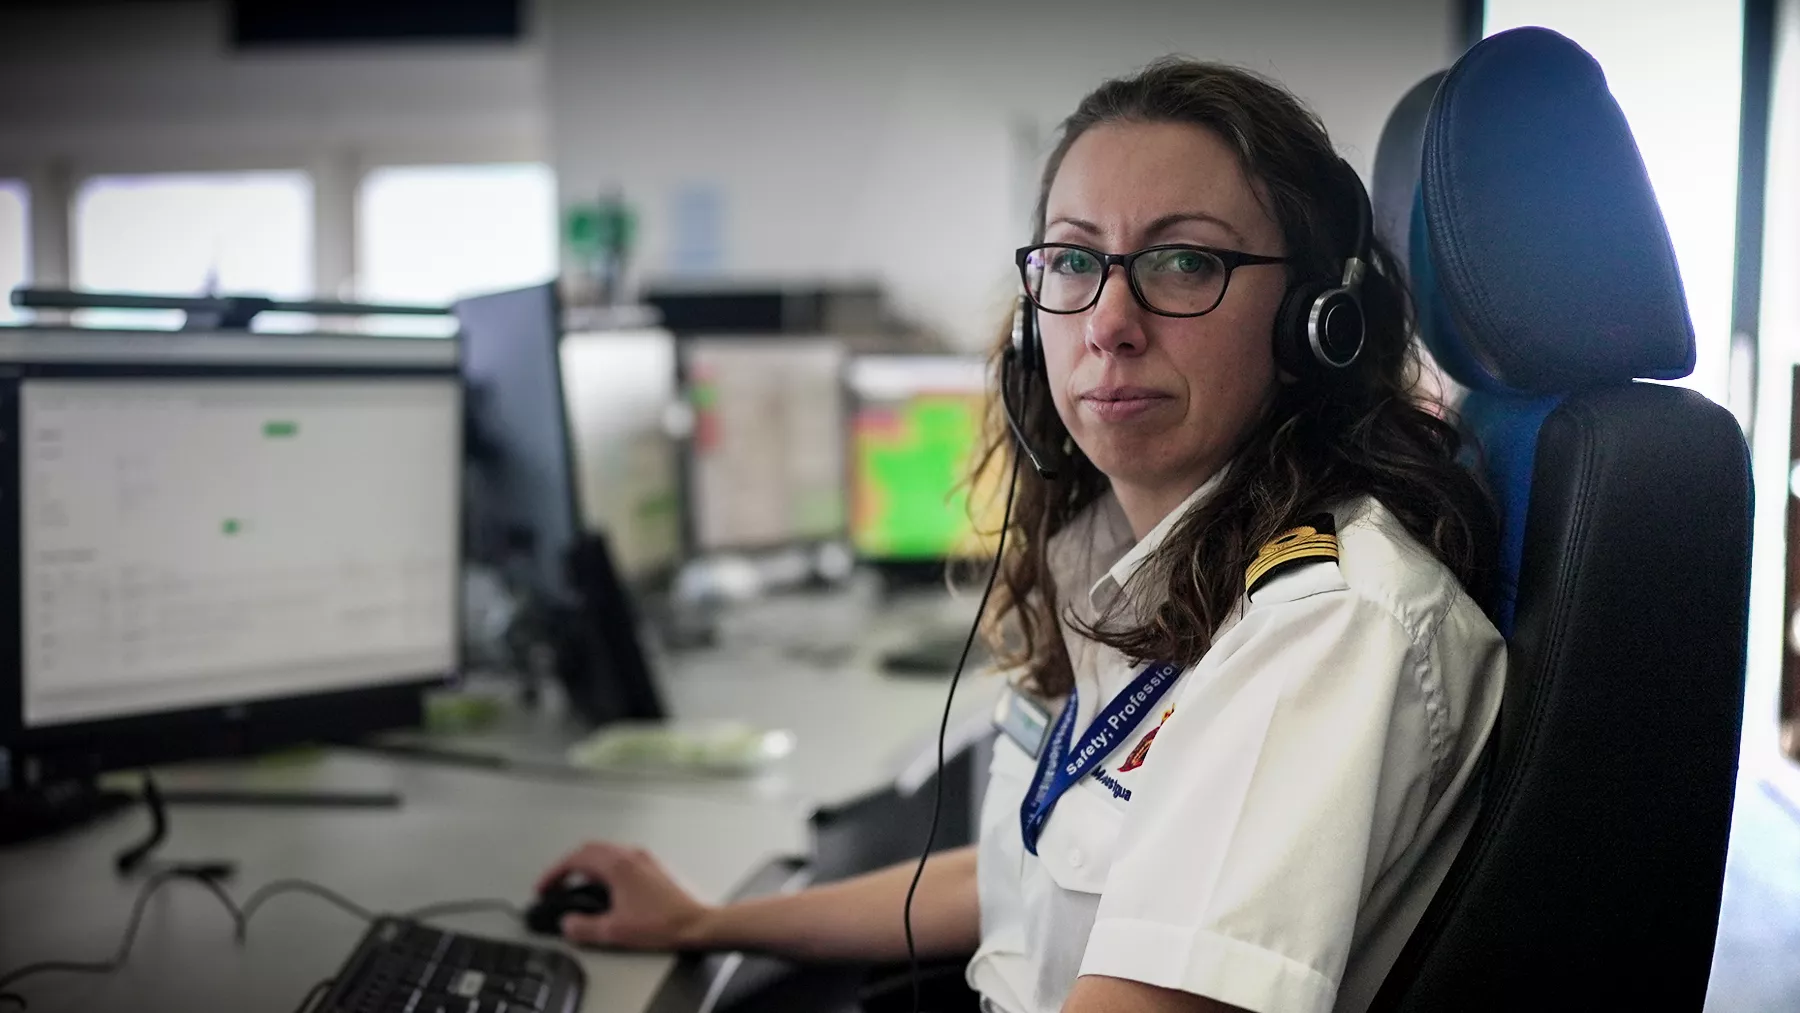 A female maritime operations officer sits facing the camera. She is wearing an official white shirt with the HM Coastguard logo and epaulettes.